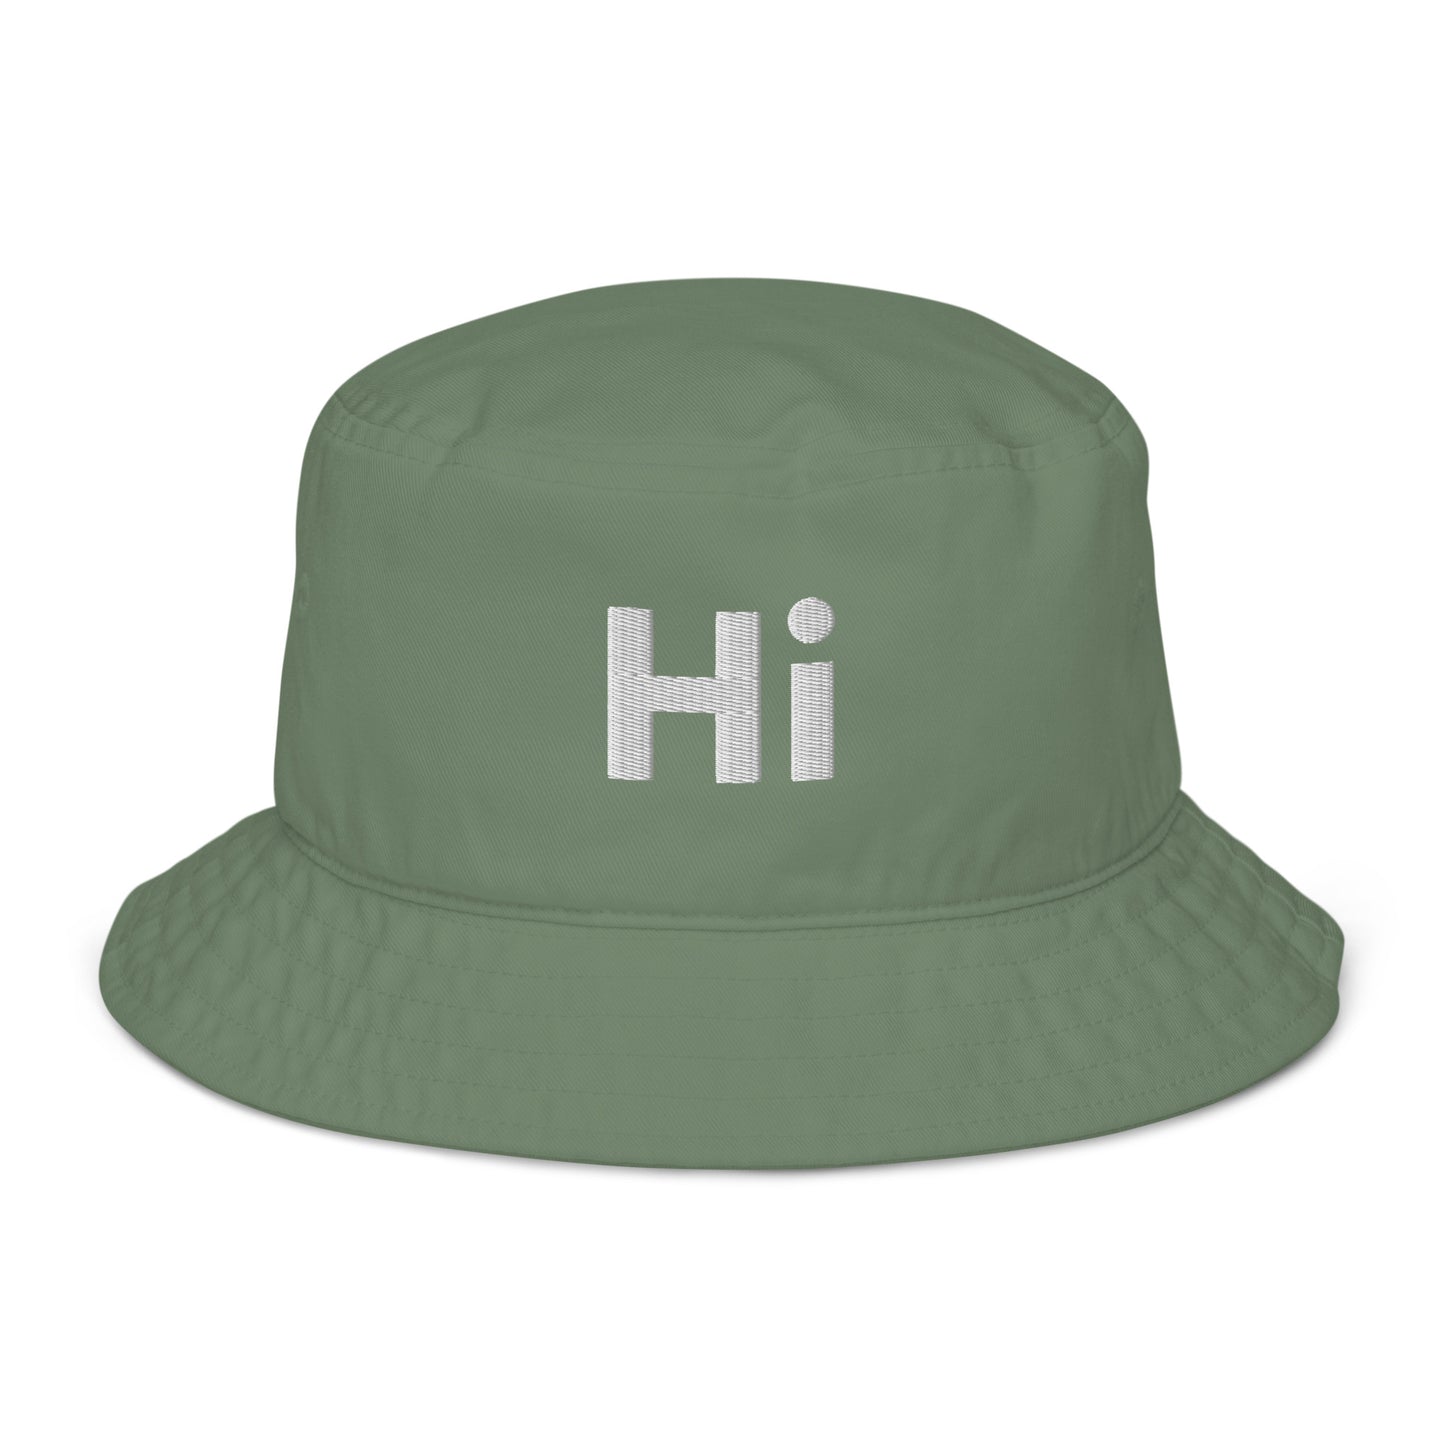 Hi Bucket Hat Organic in Dill Green by HiJohnny.com